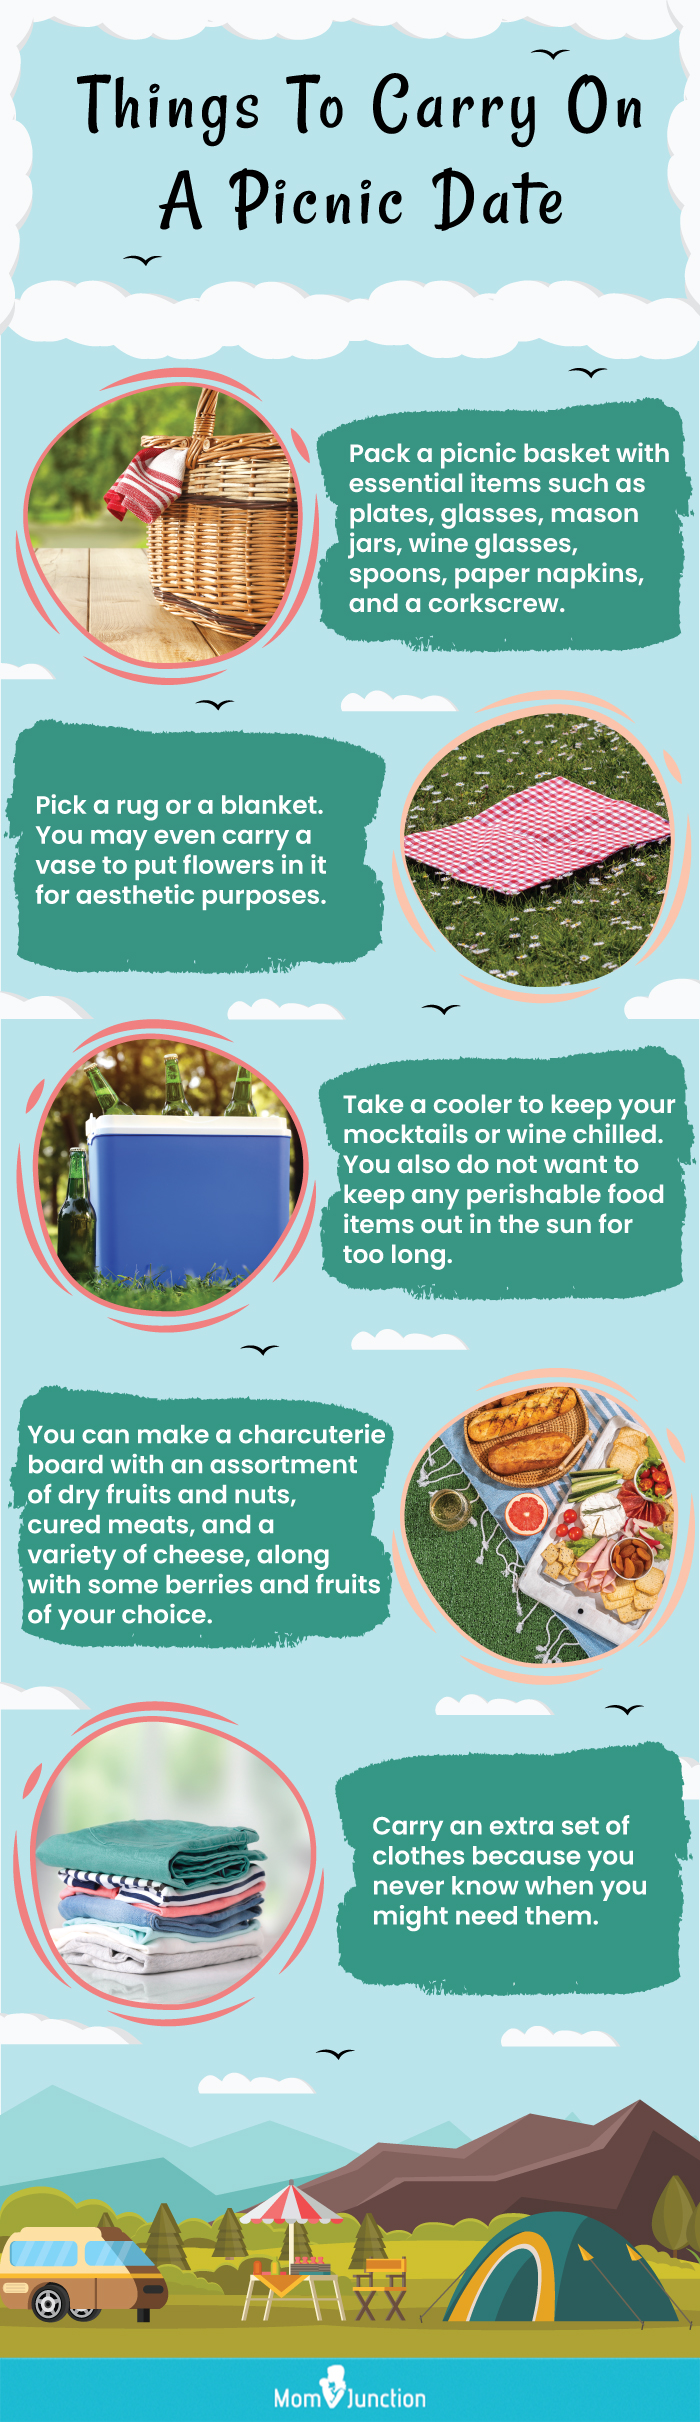 things to carry on a picnic date (infographic)